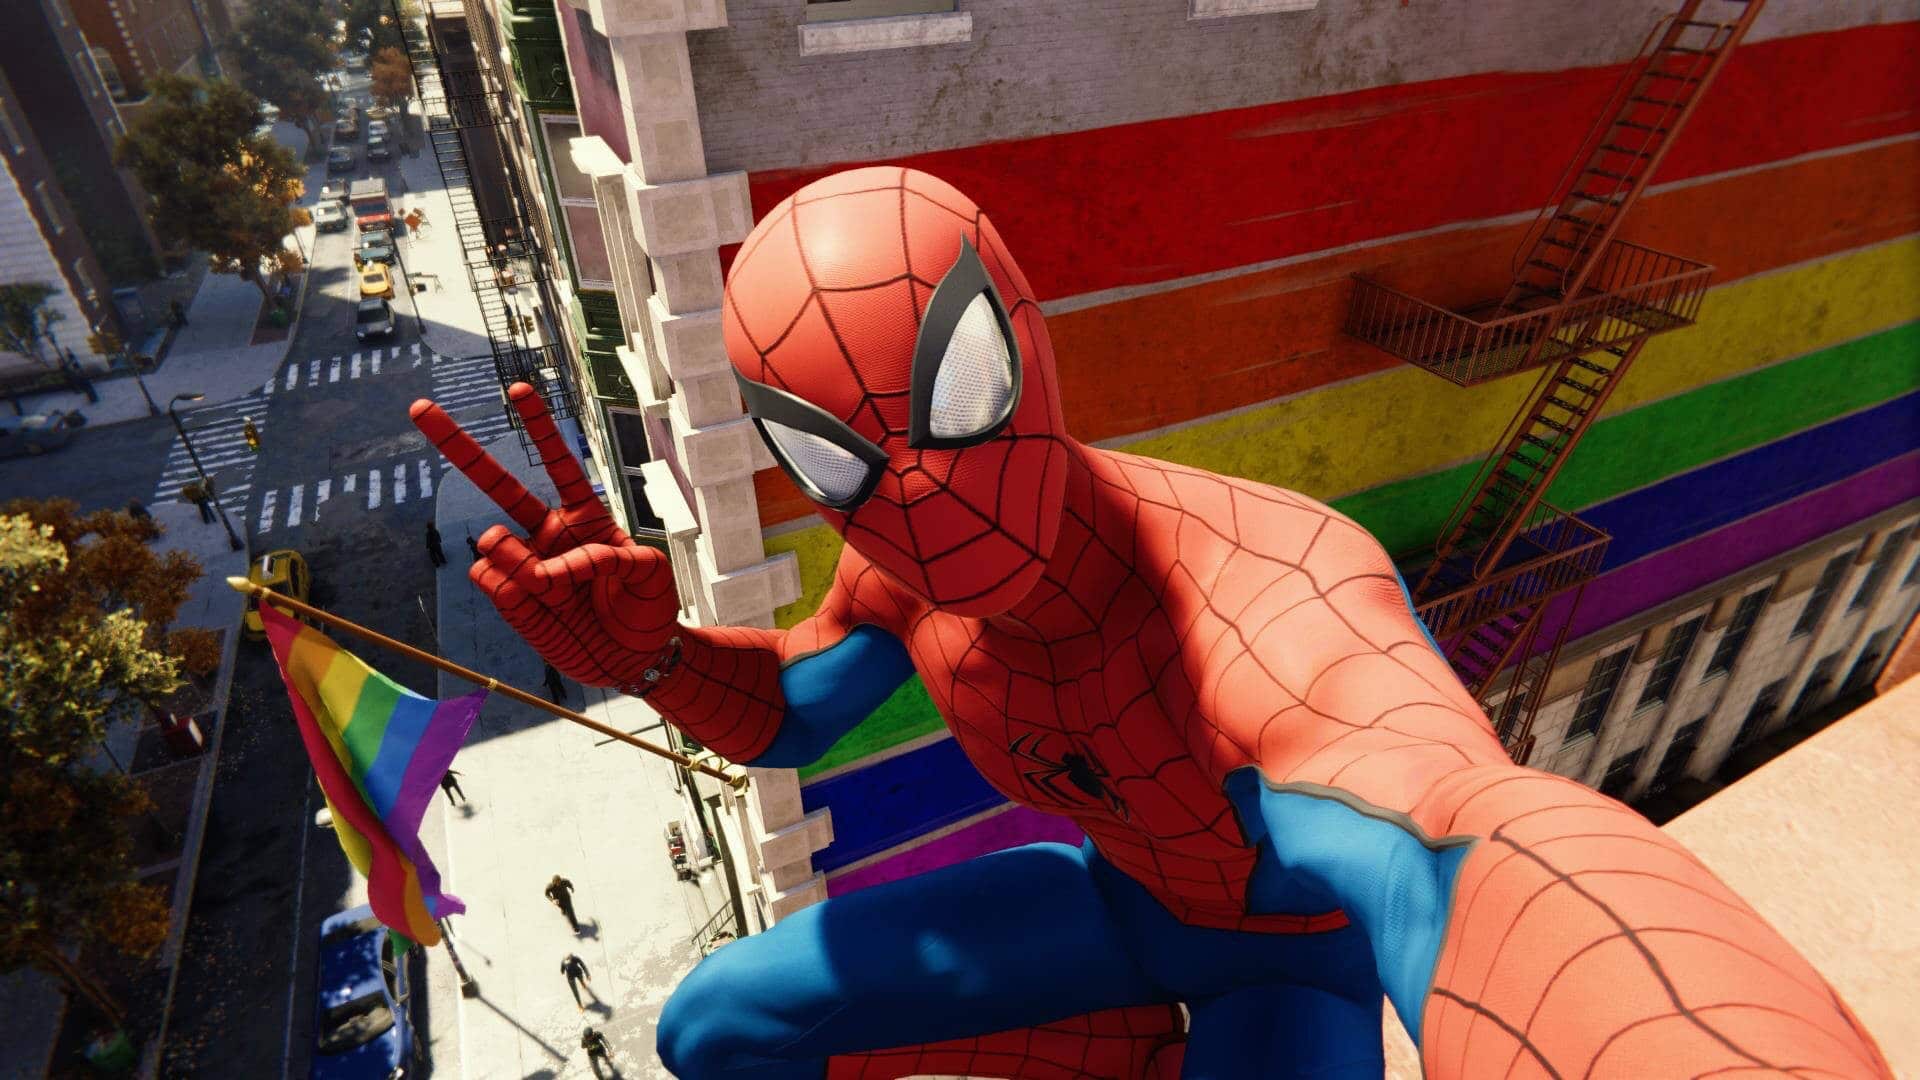 pride-flags-featured-new-spider-man-video-game-1-GamersRD (1)